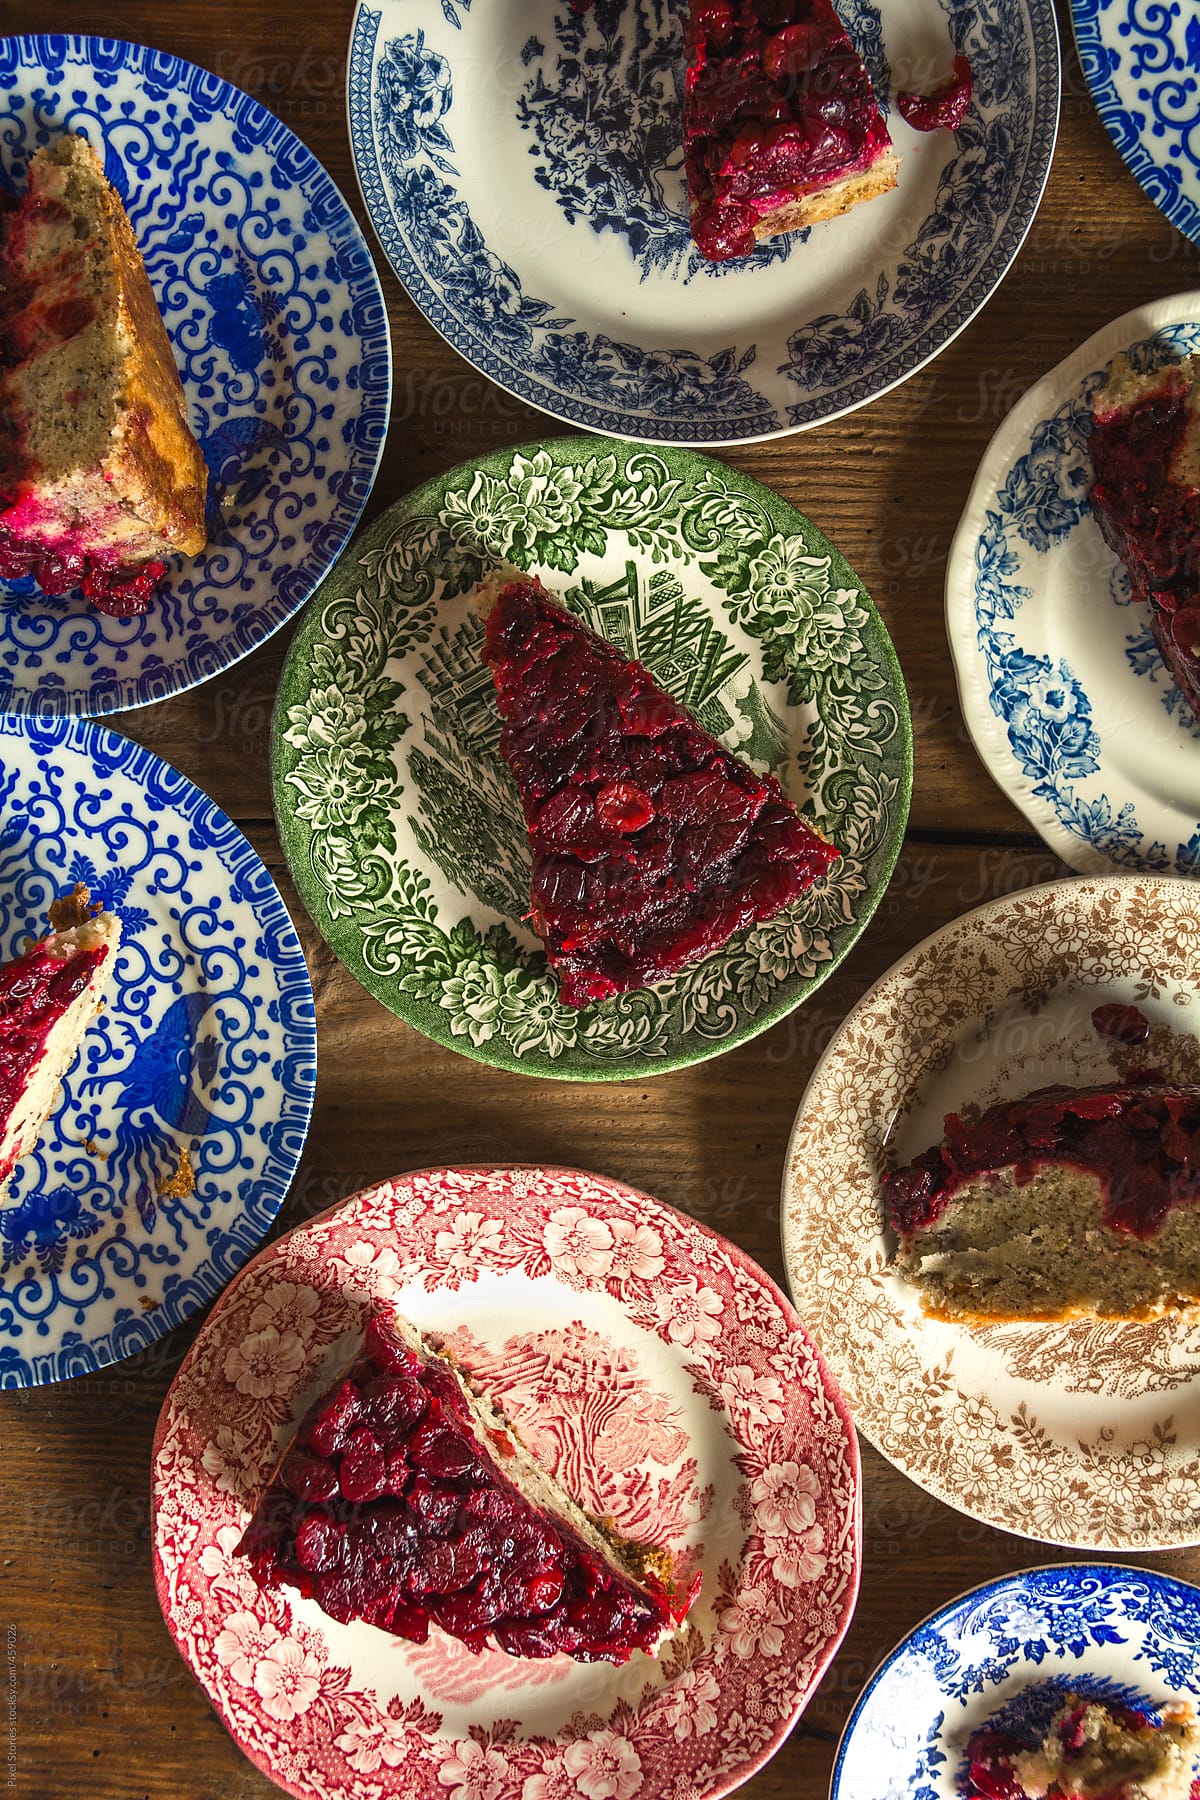 Food: Cranberry and Raspberry upside down cake slices